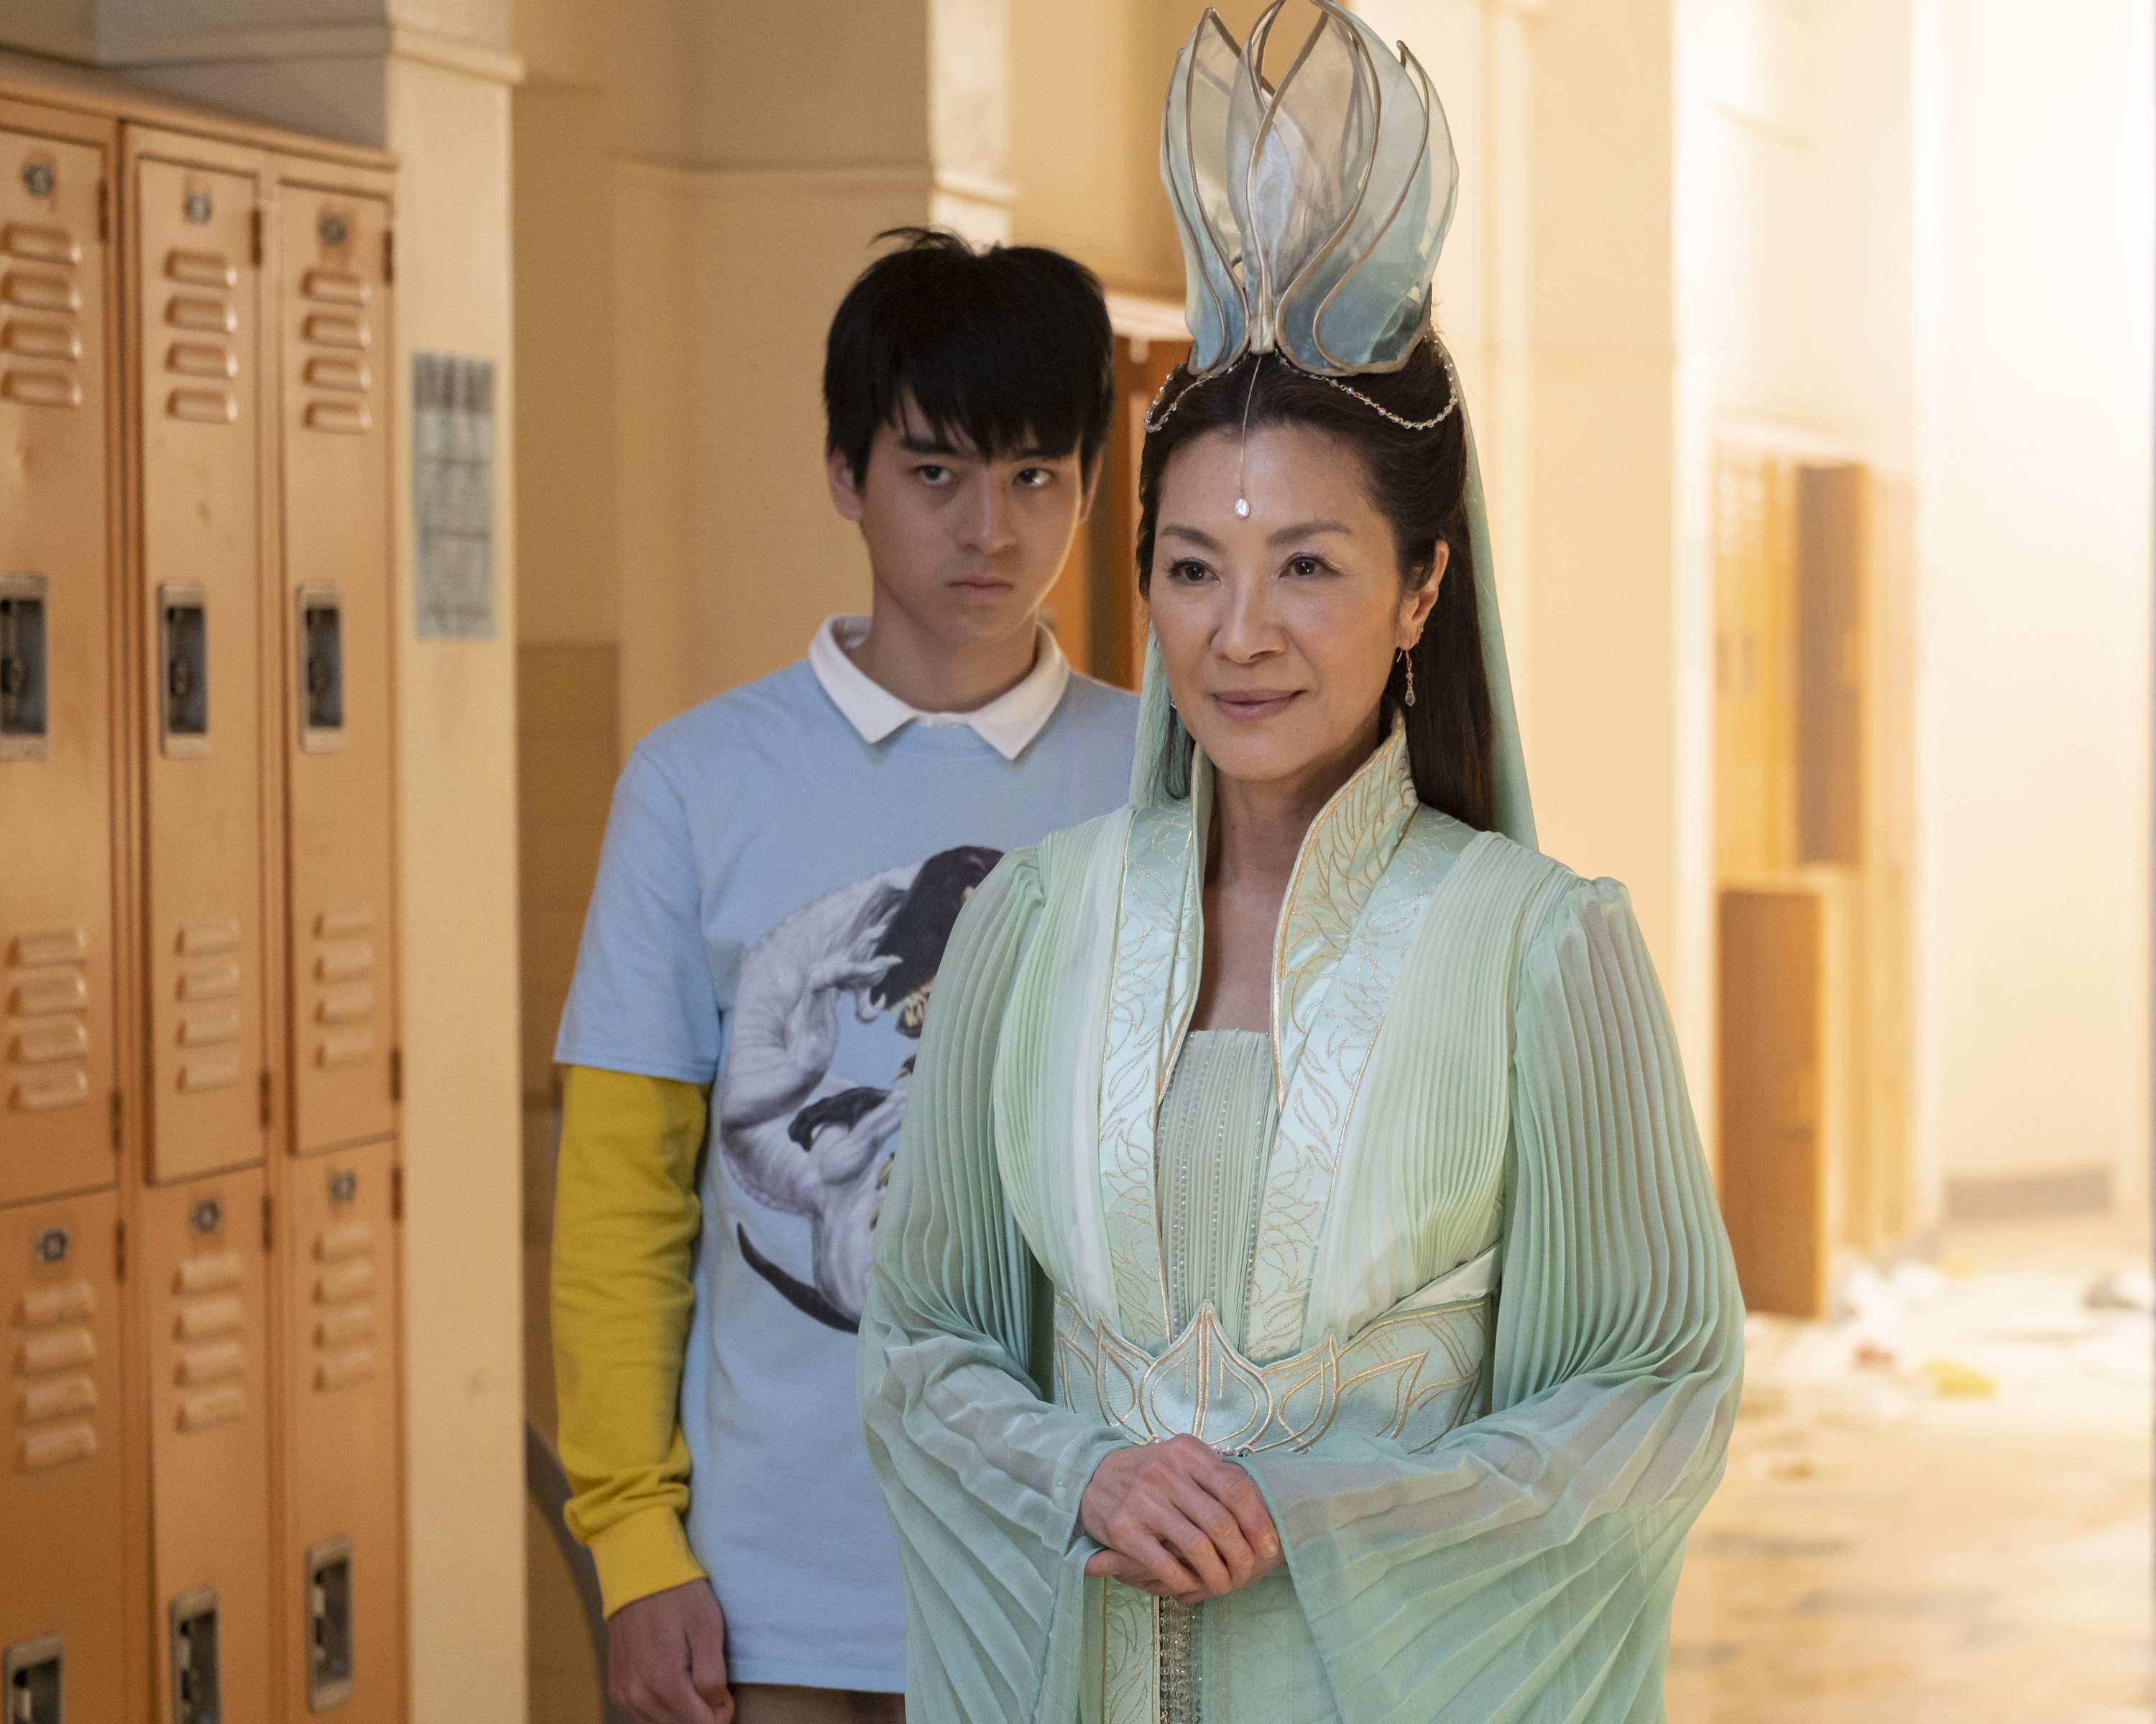 Michelle Yeoh as Guanyin (front) and Ben Wang as student Jin Wang in a still from Disney+’s “American Born Chinese”. Photo: Disney+